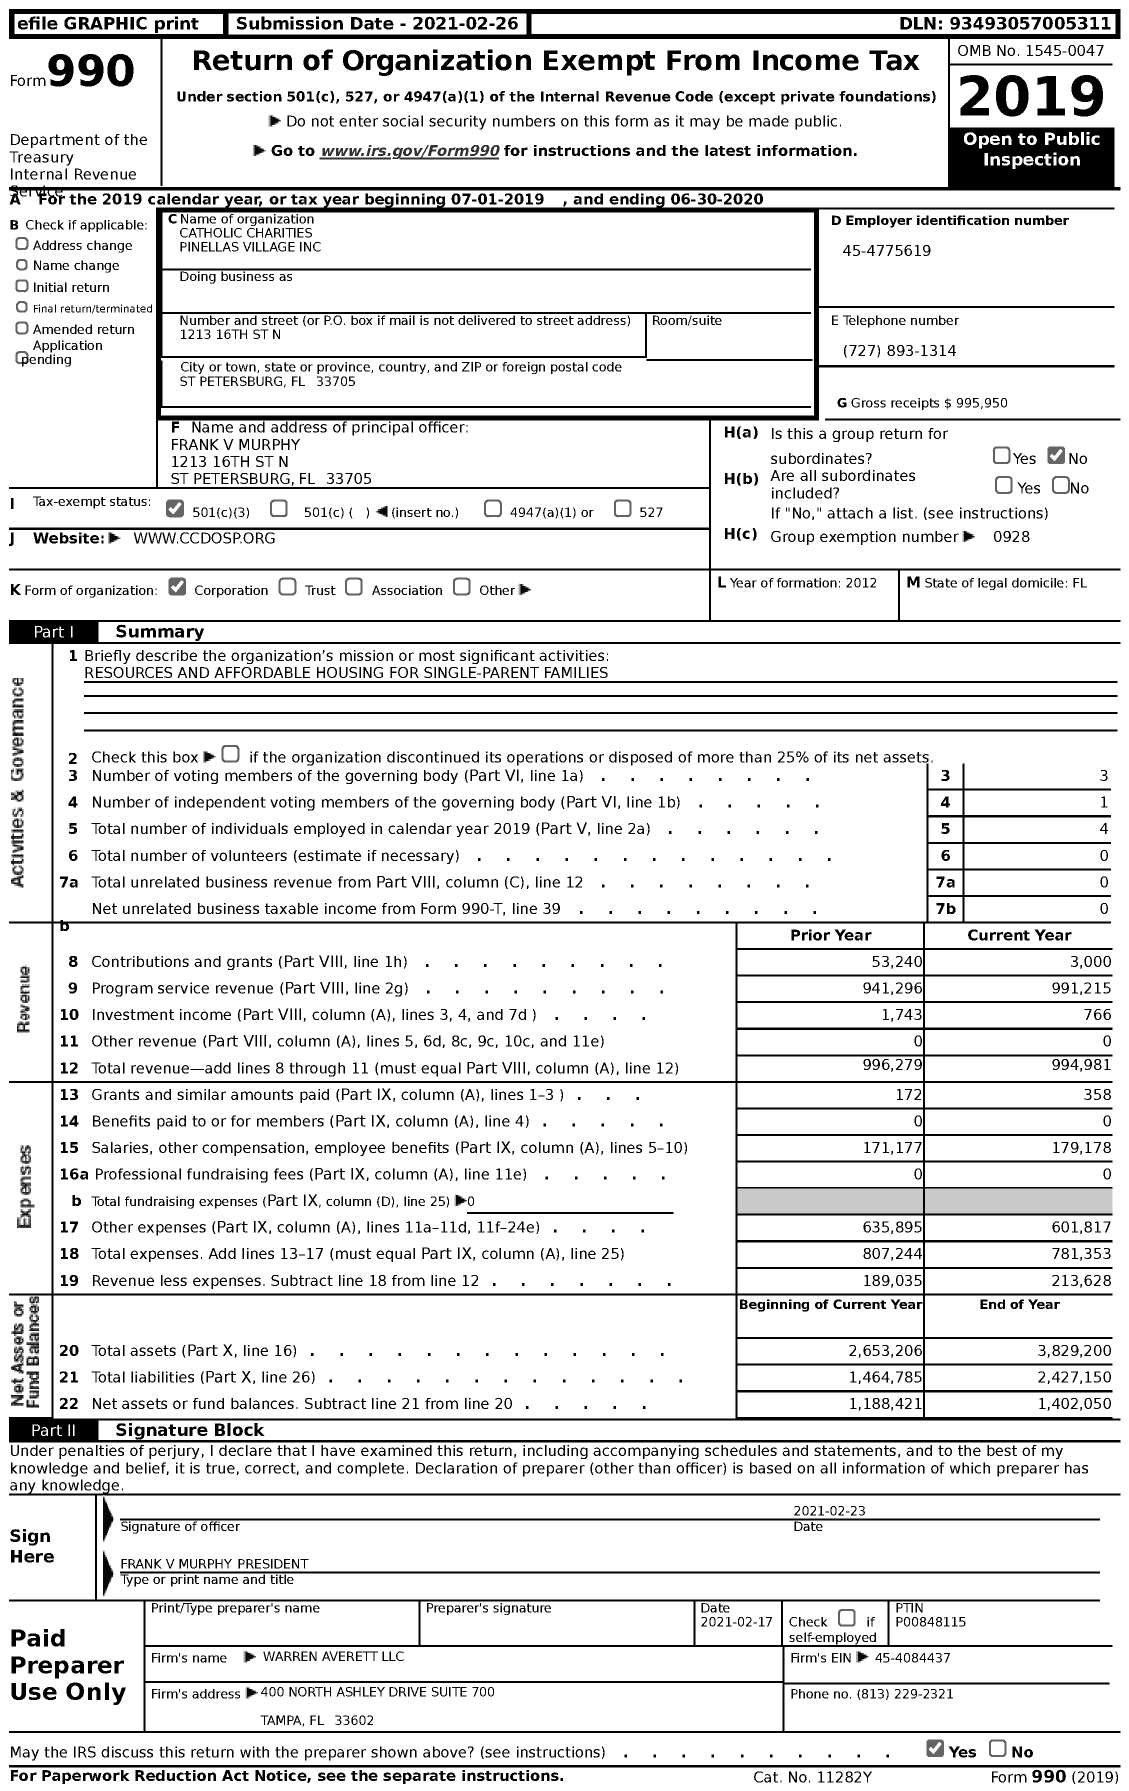 Image of first page of 2019 Form 990 for Catholic Charities Pinellas Village